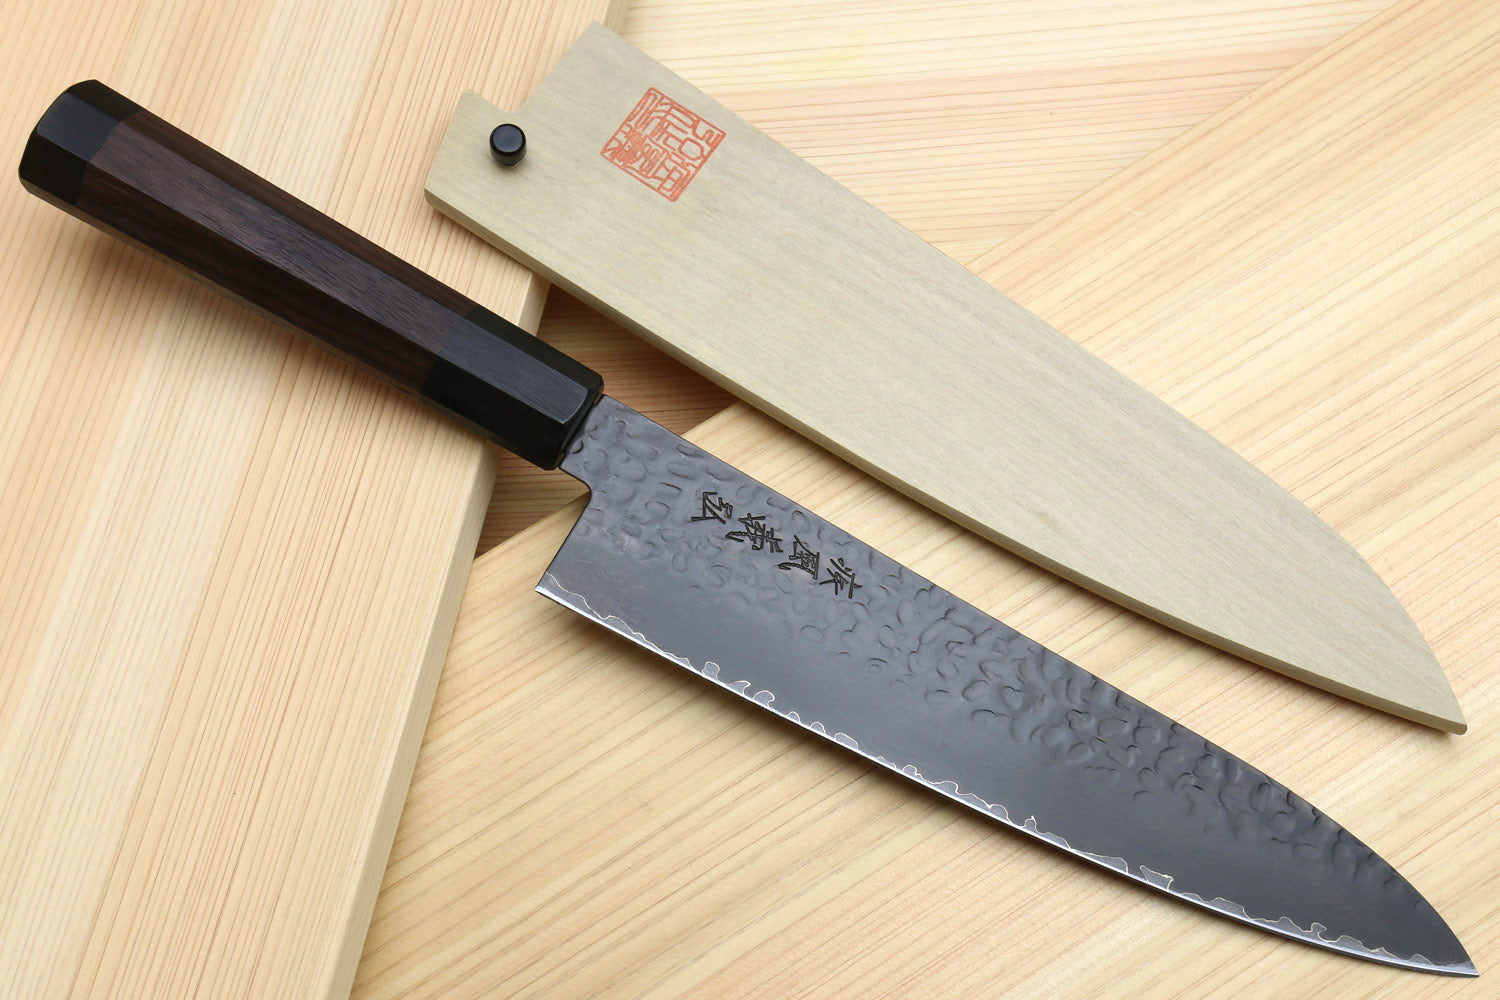 COMMERCIAL SERIES) CHEF'S KNIFE 10